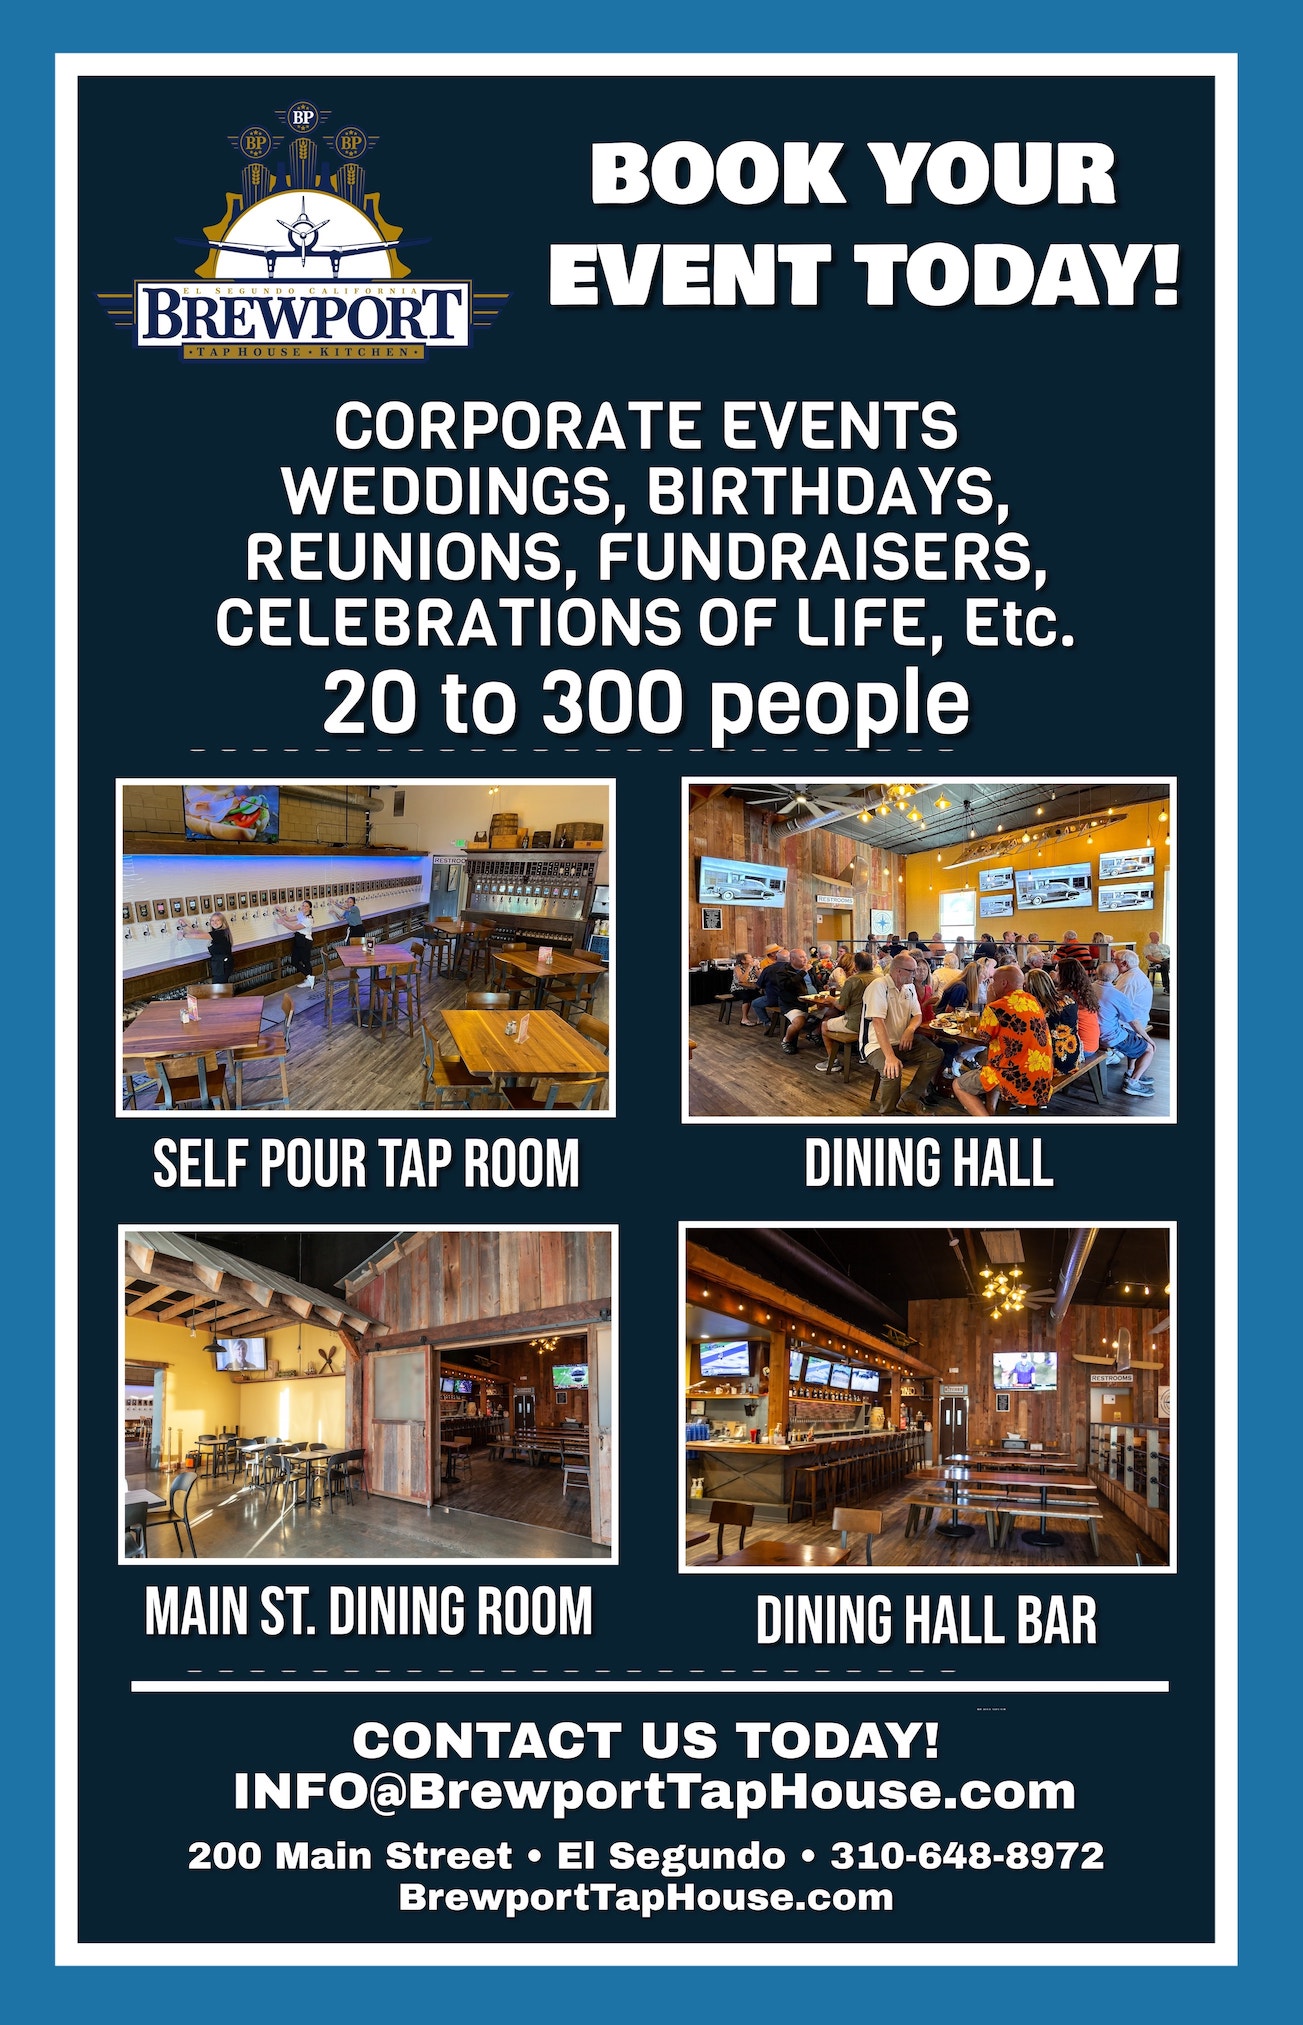 Corporate events, Weddings, Birthdays, Reunions, Fundraisers and more.